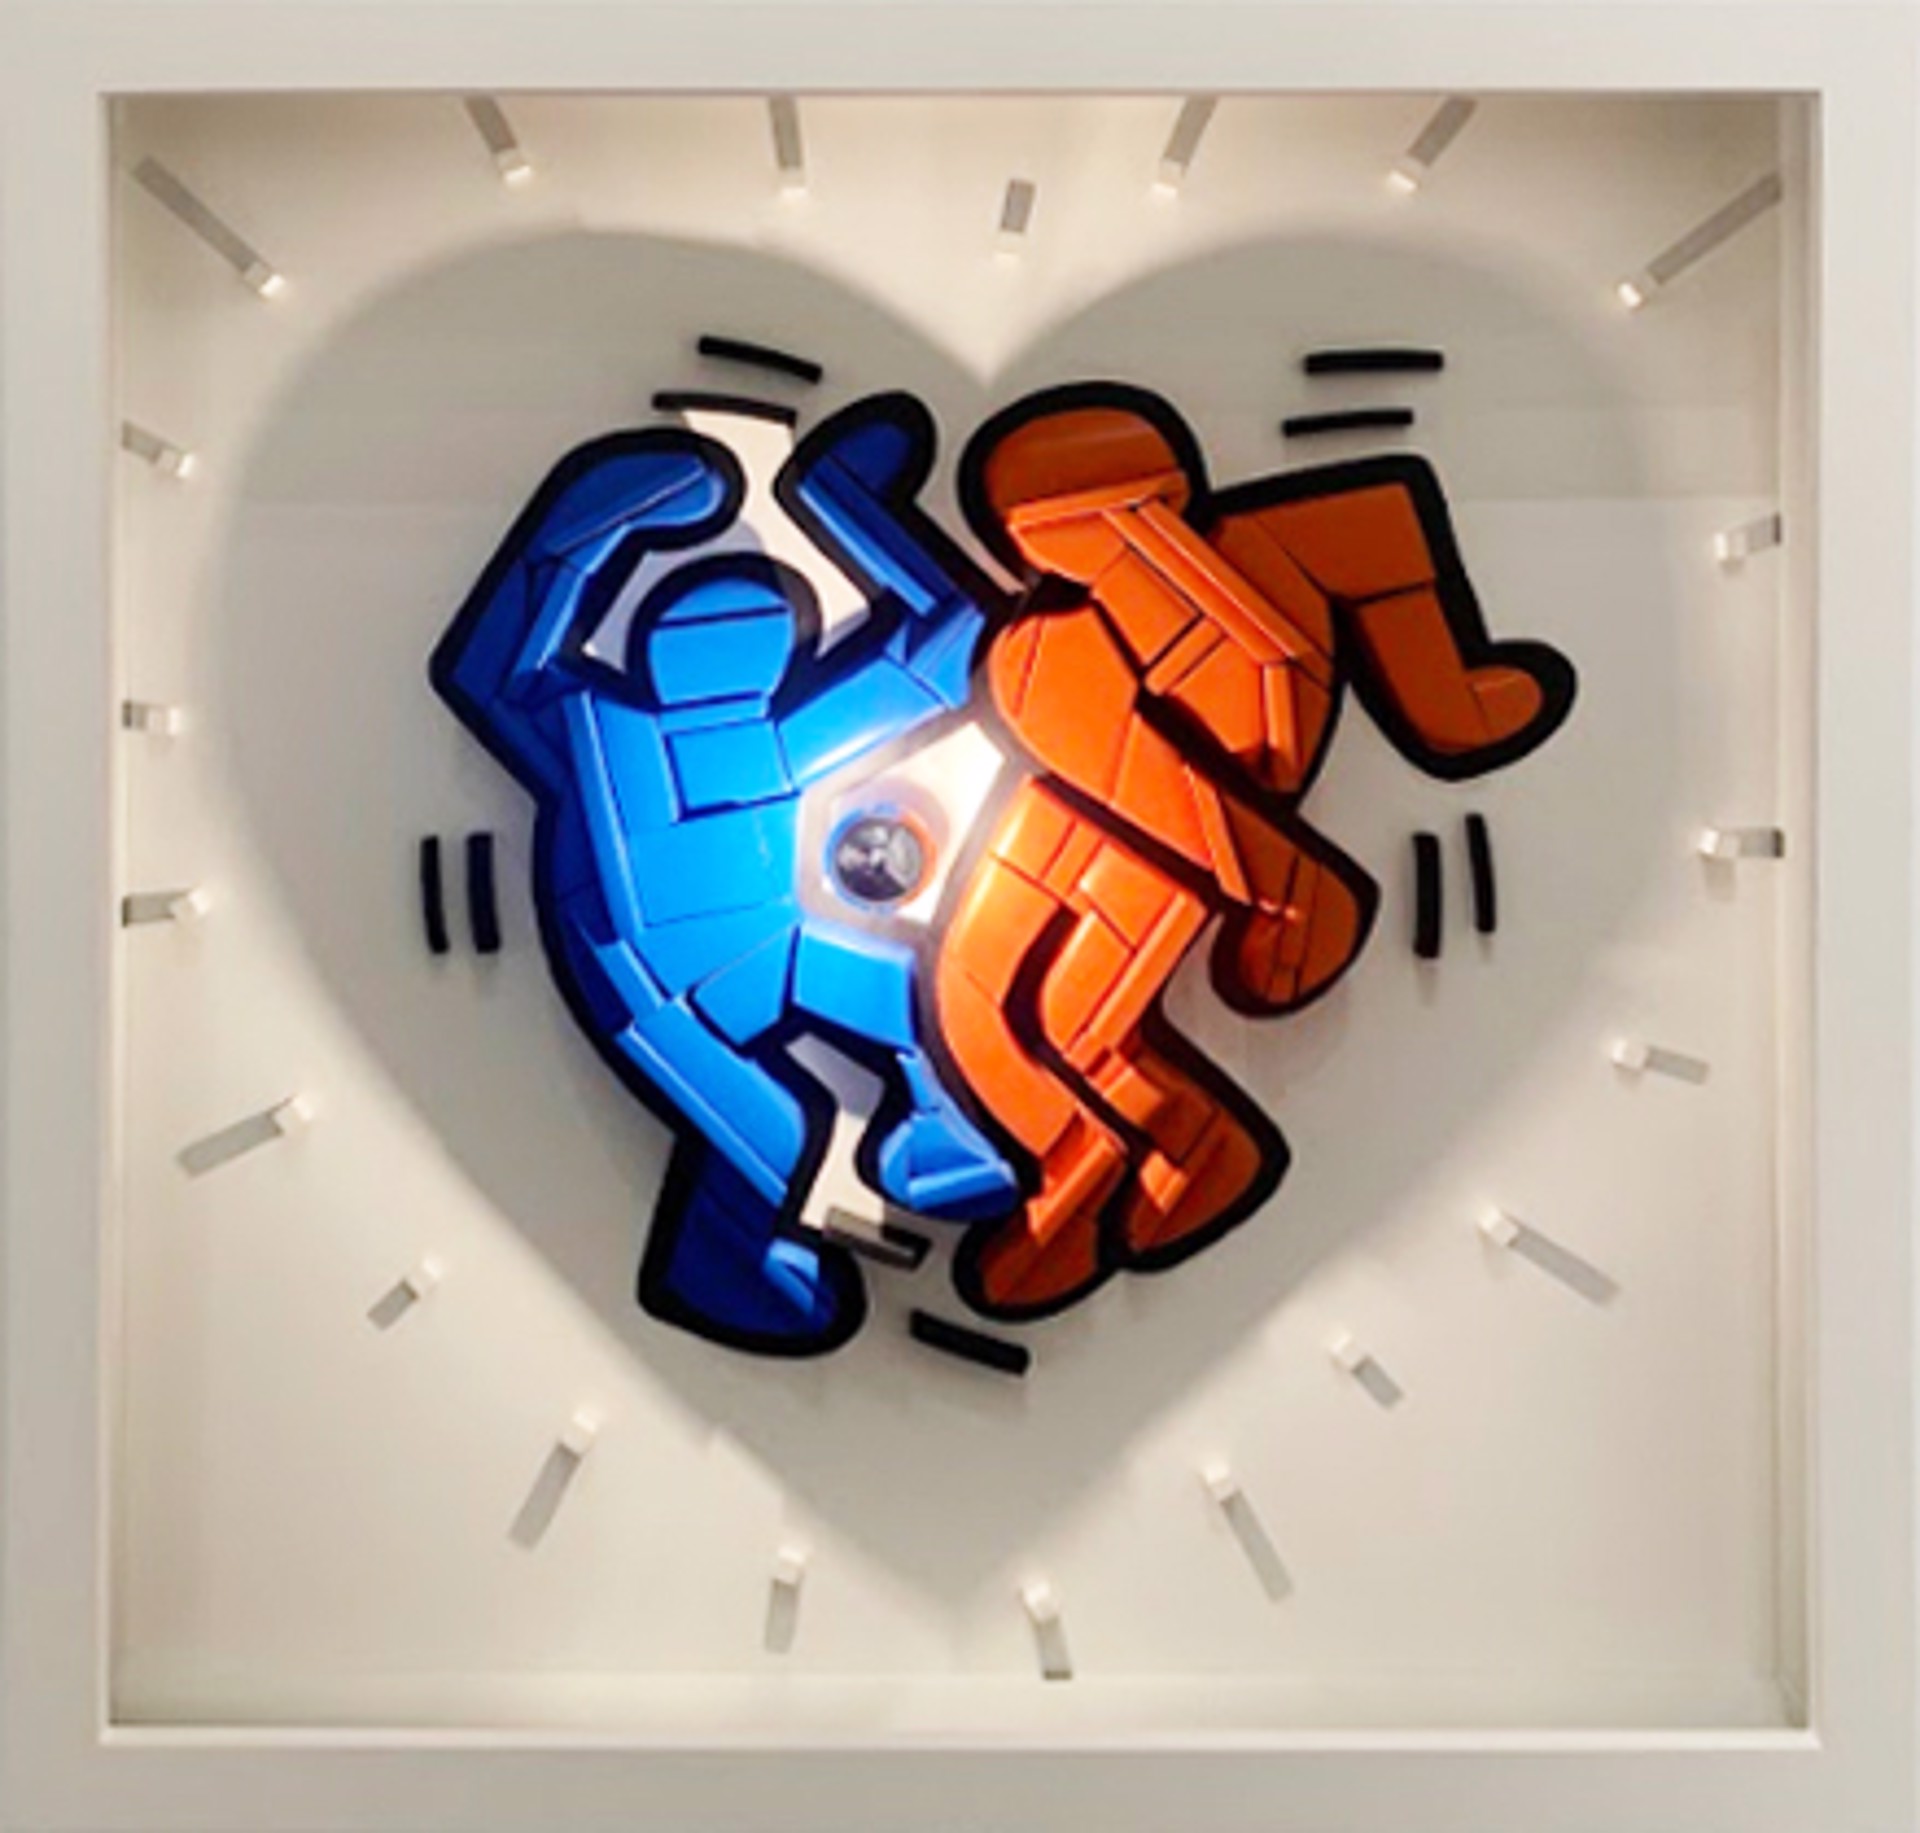 Buddy System III (Homage to Haring by J.P. Goncalves, Silhouette